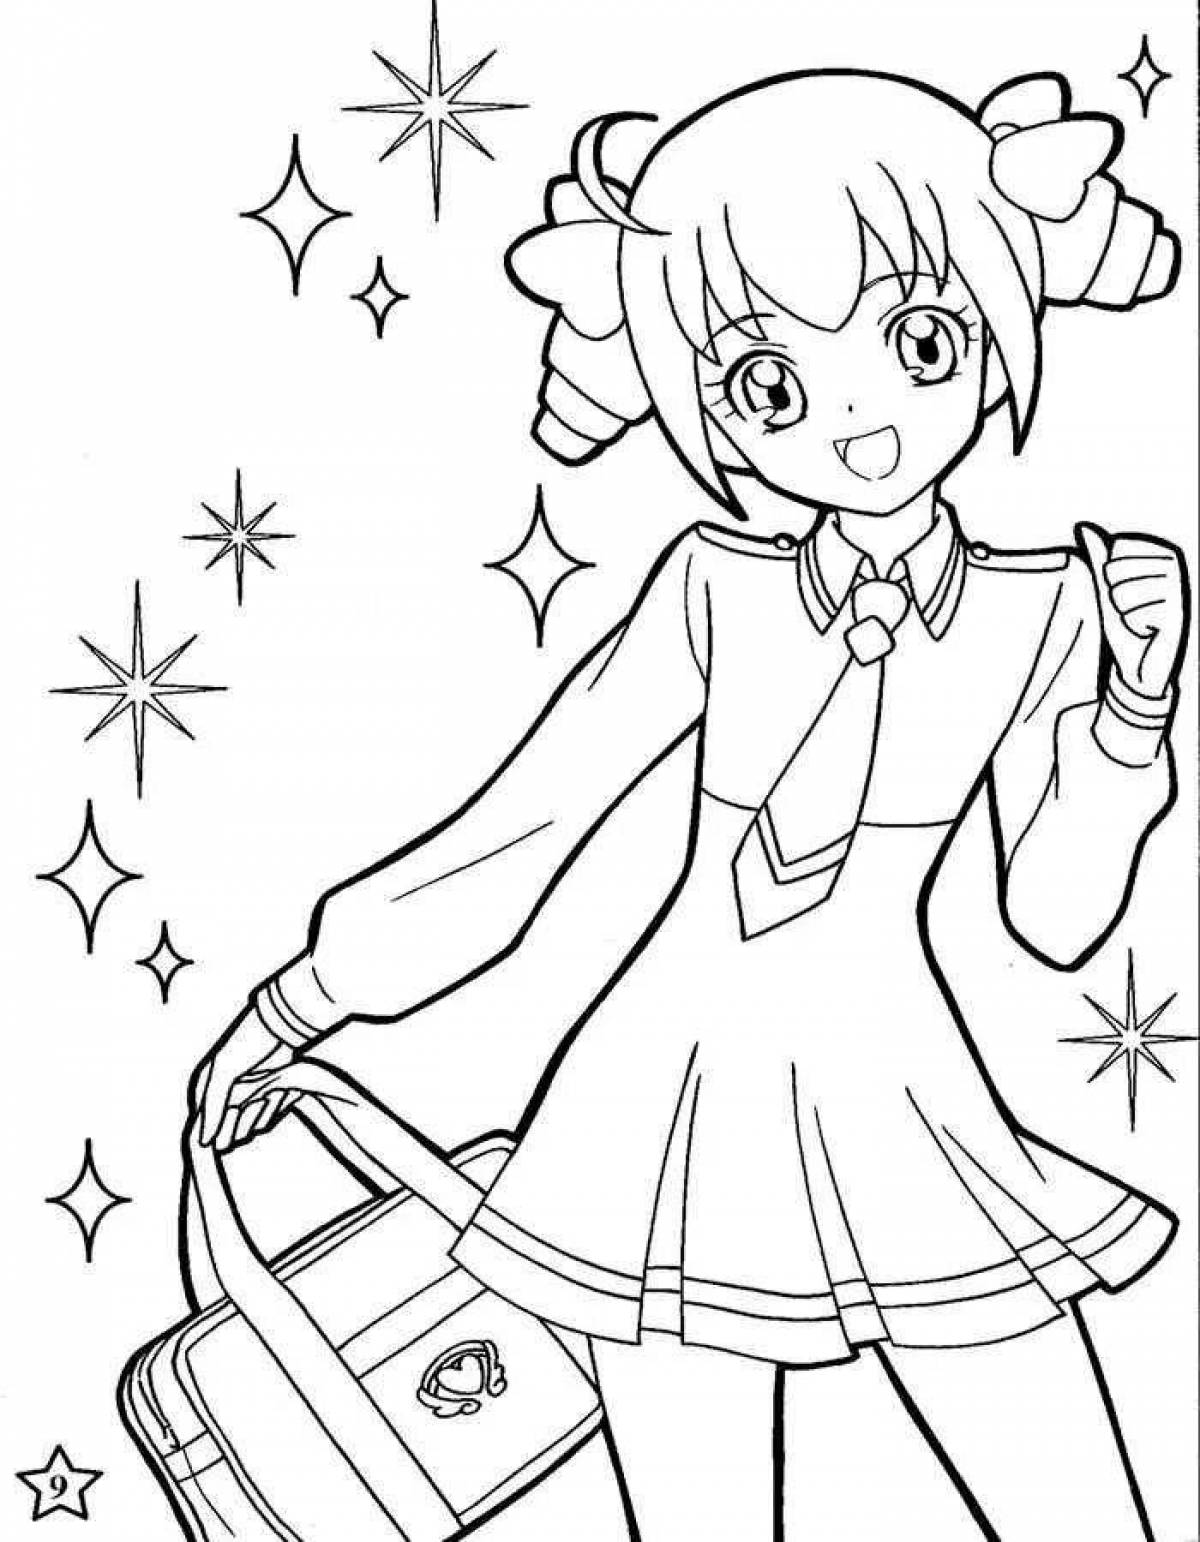 Colorful anime phone coloring page